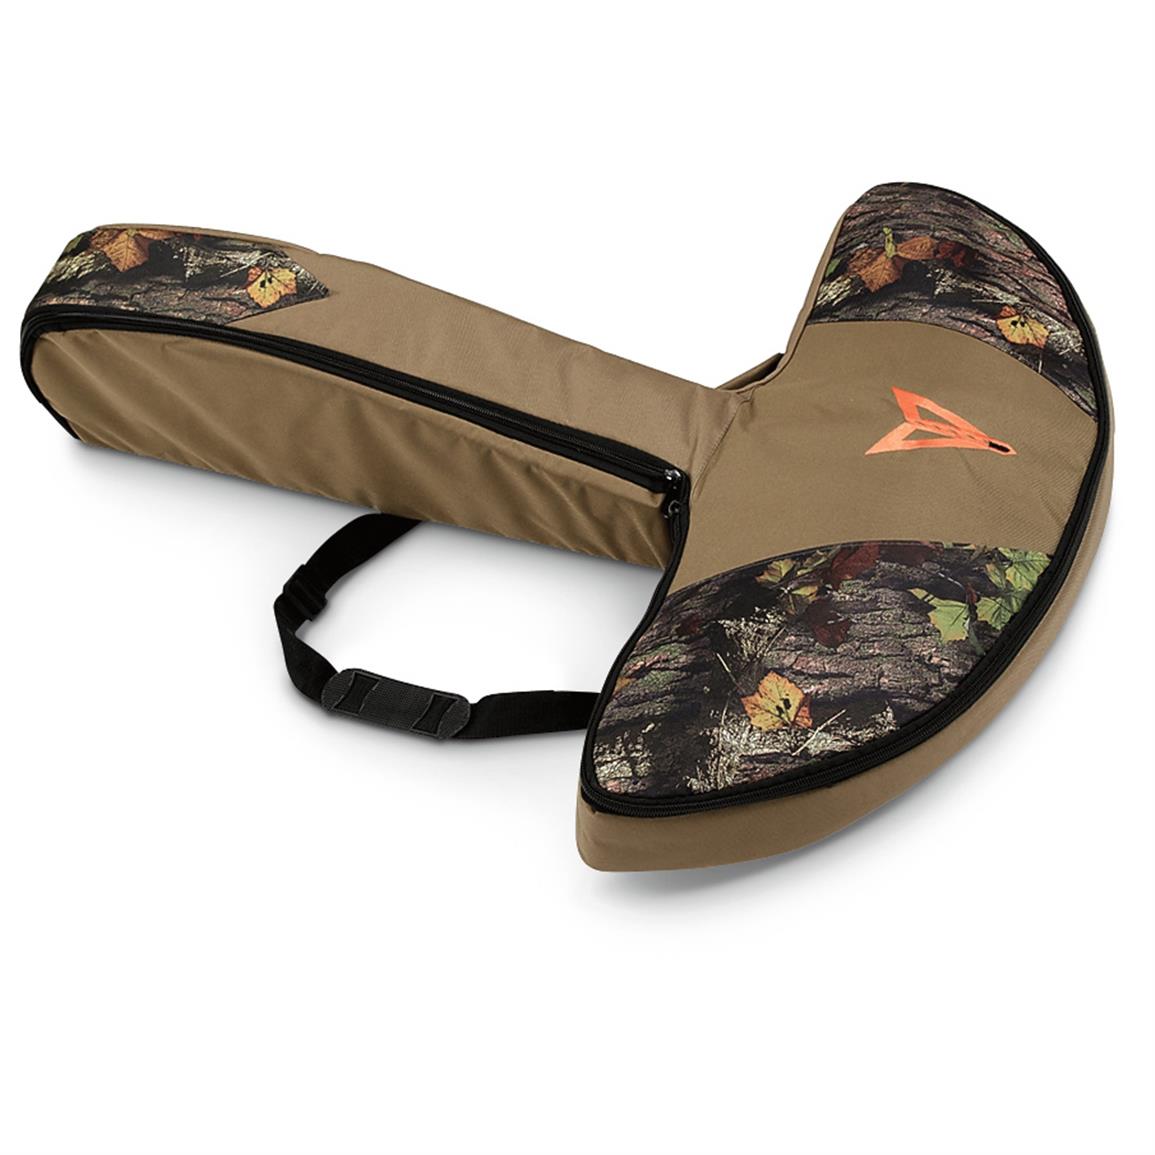 Keep your crossbow protected and make it easy to carry it all at one low price